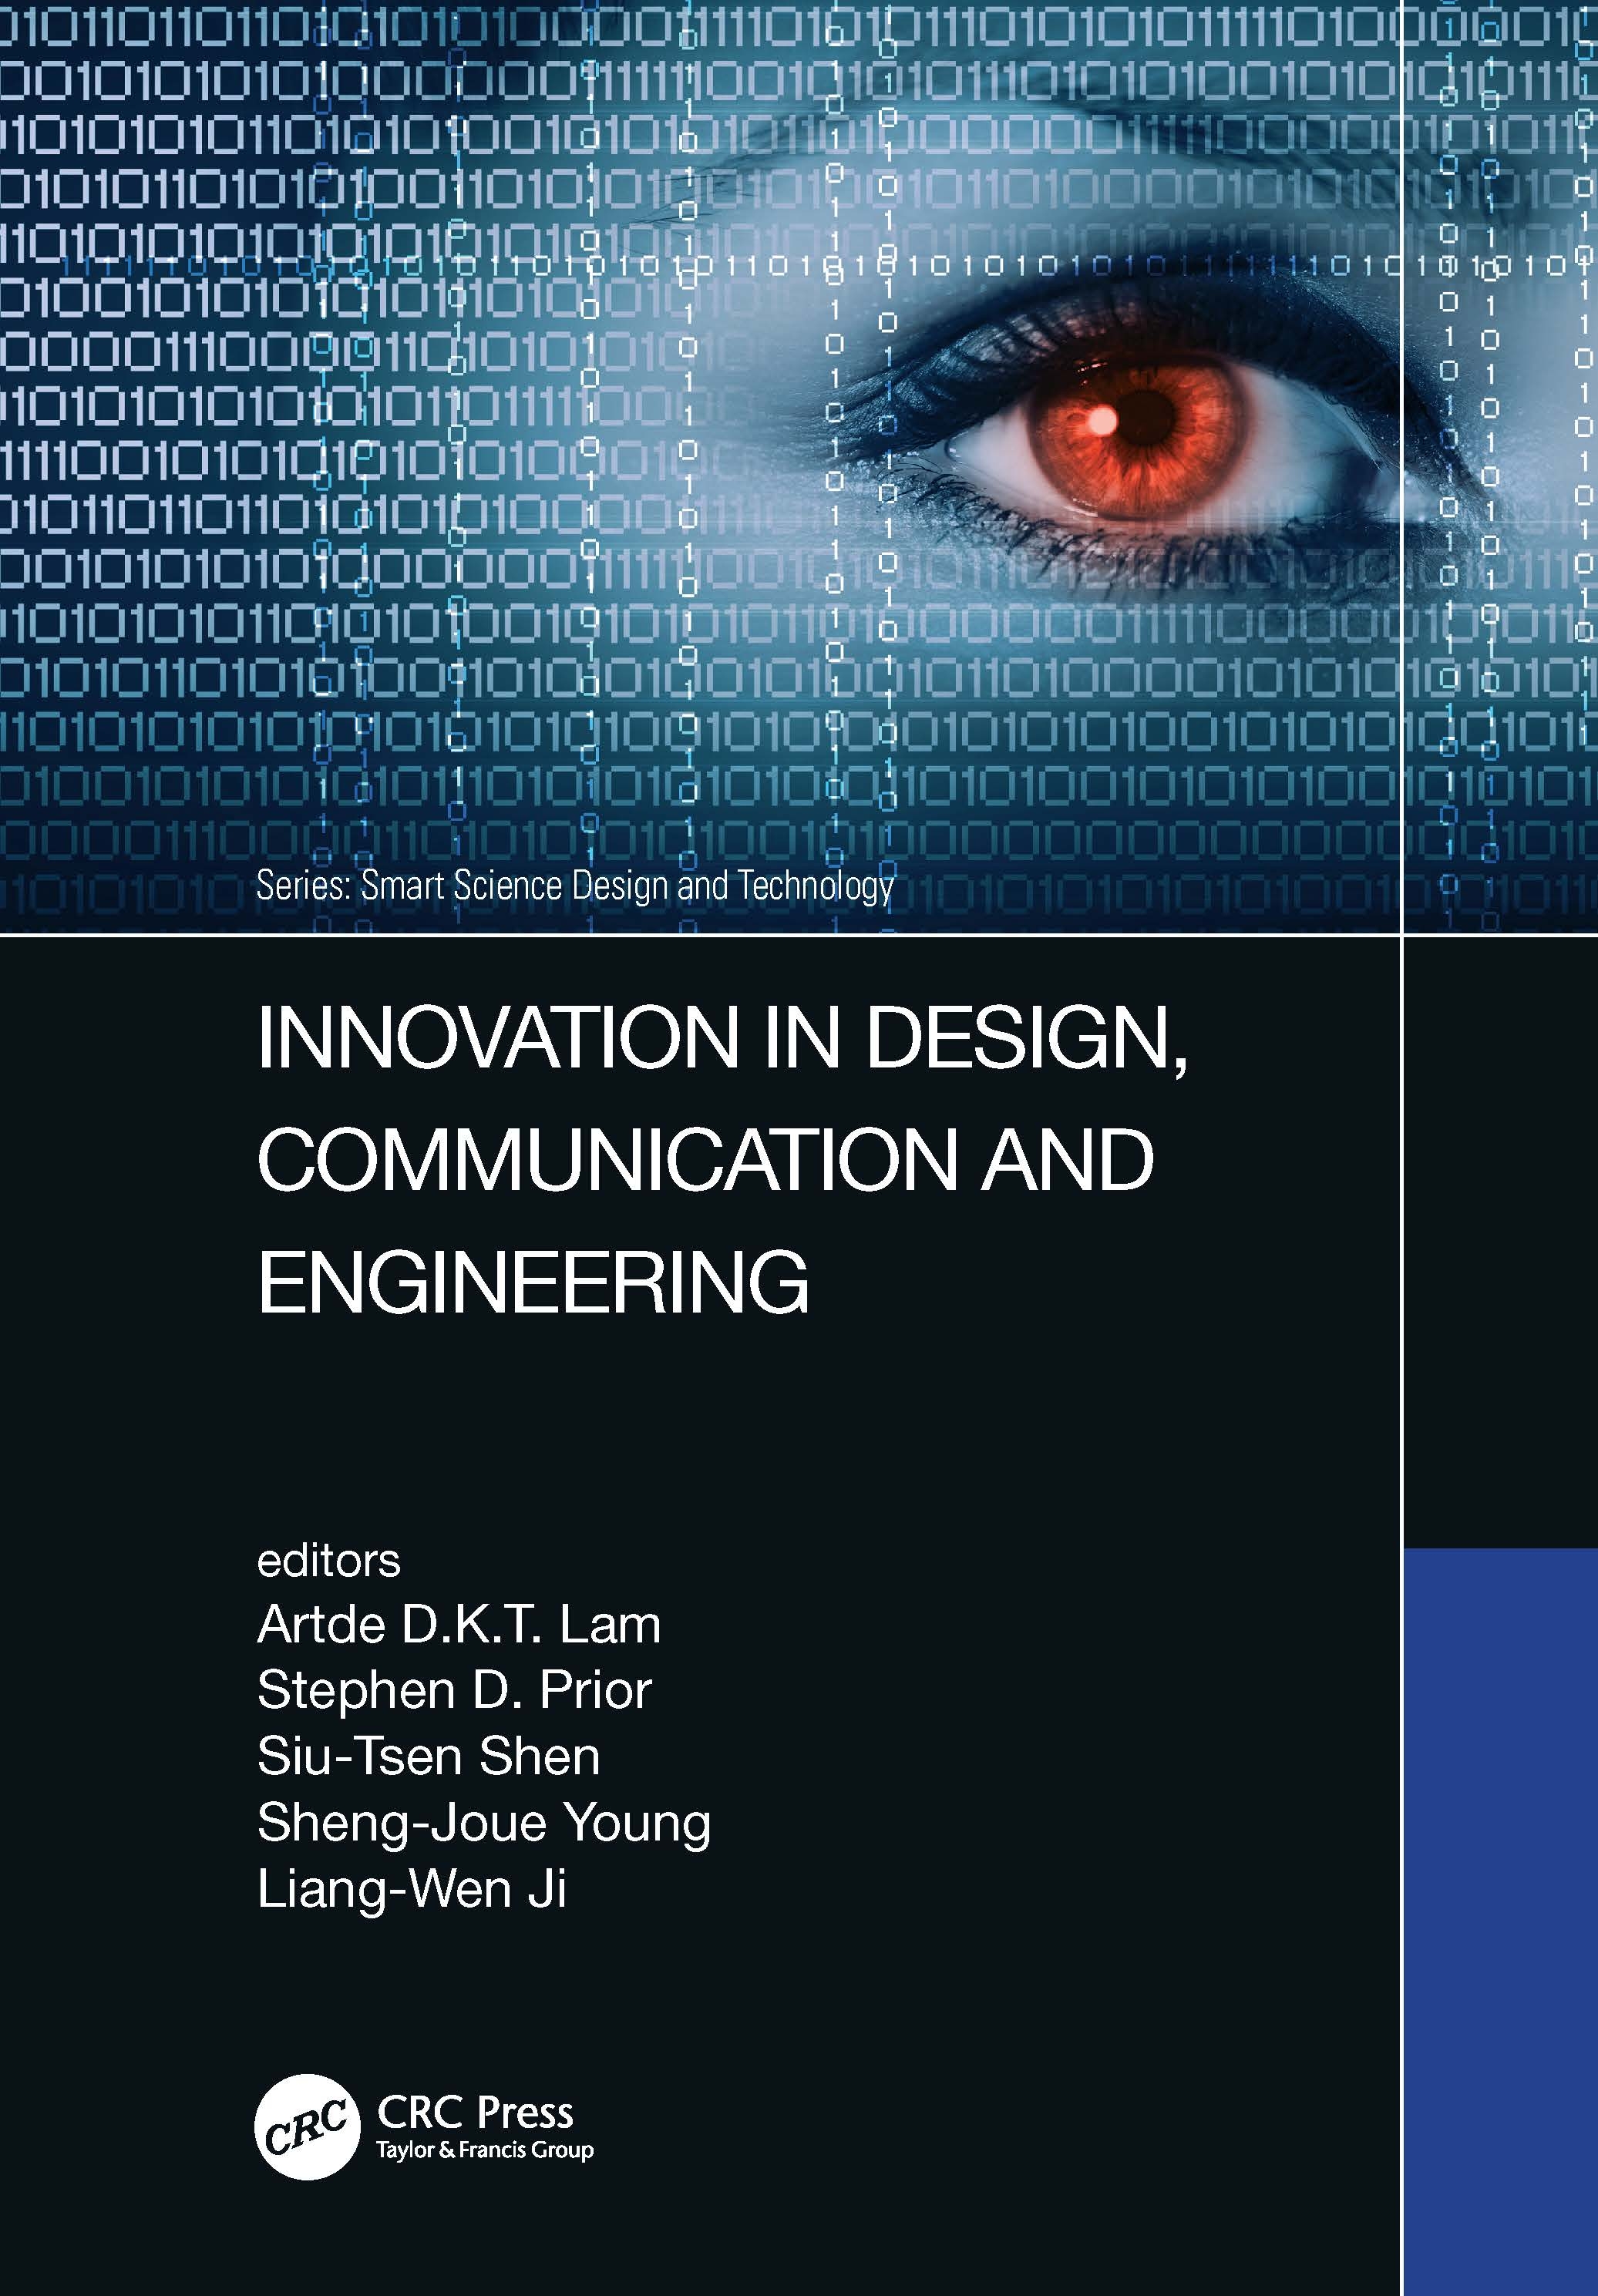 Innovation in Design, Communication and Engineering: Proceedings of the 8th Asian Conference on Innovation, Communication and Engineering (Acice 2019)